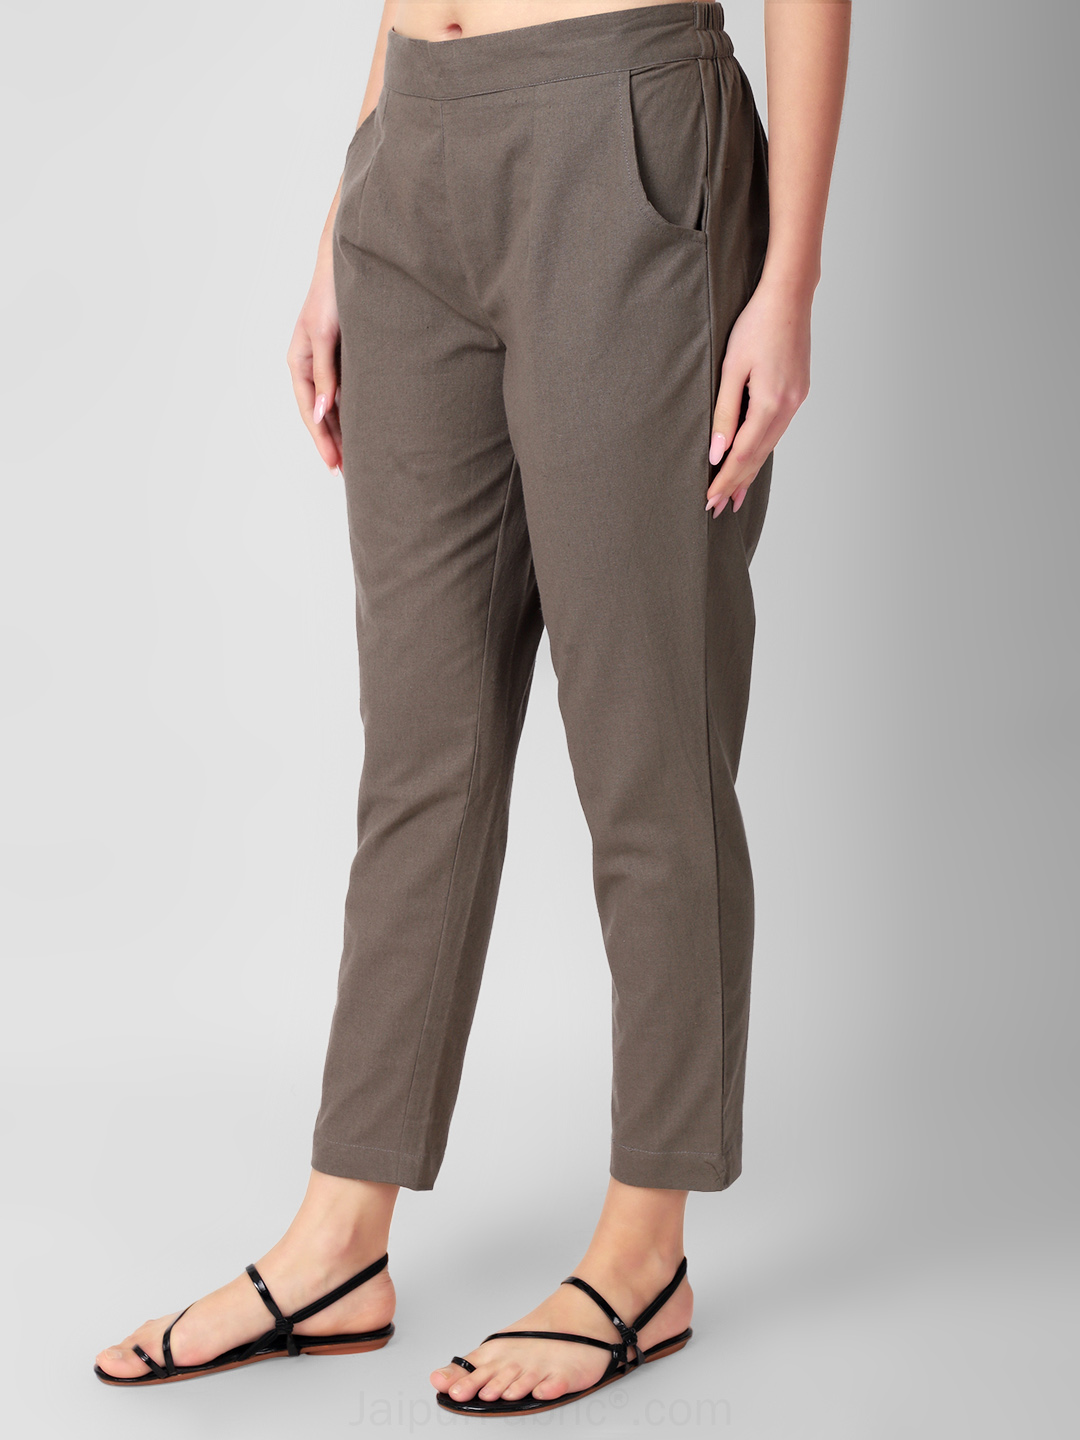 Ladies Cotton trouser Pant at Rs.200/Piece in ahmedabad offer by M M  Creation